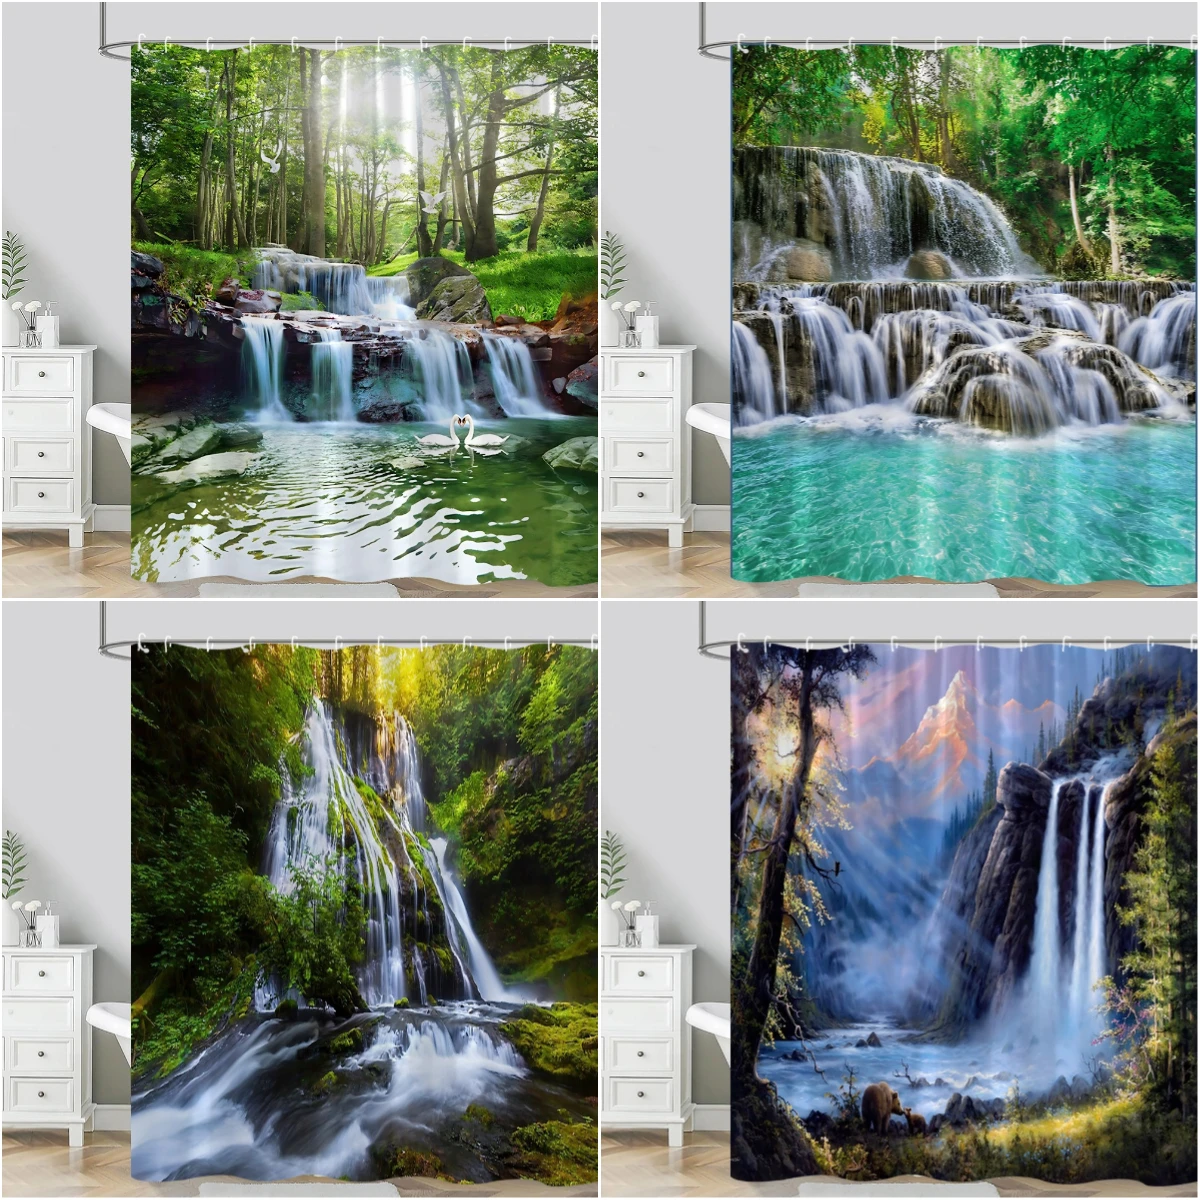 

Natural Forest Shower Curtain Rainforest Modern Natural Scenery Waterfall River Polyester Fabric Bathroom Decor Curtain Washable